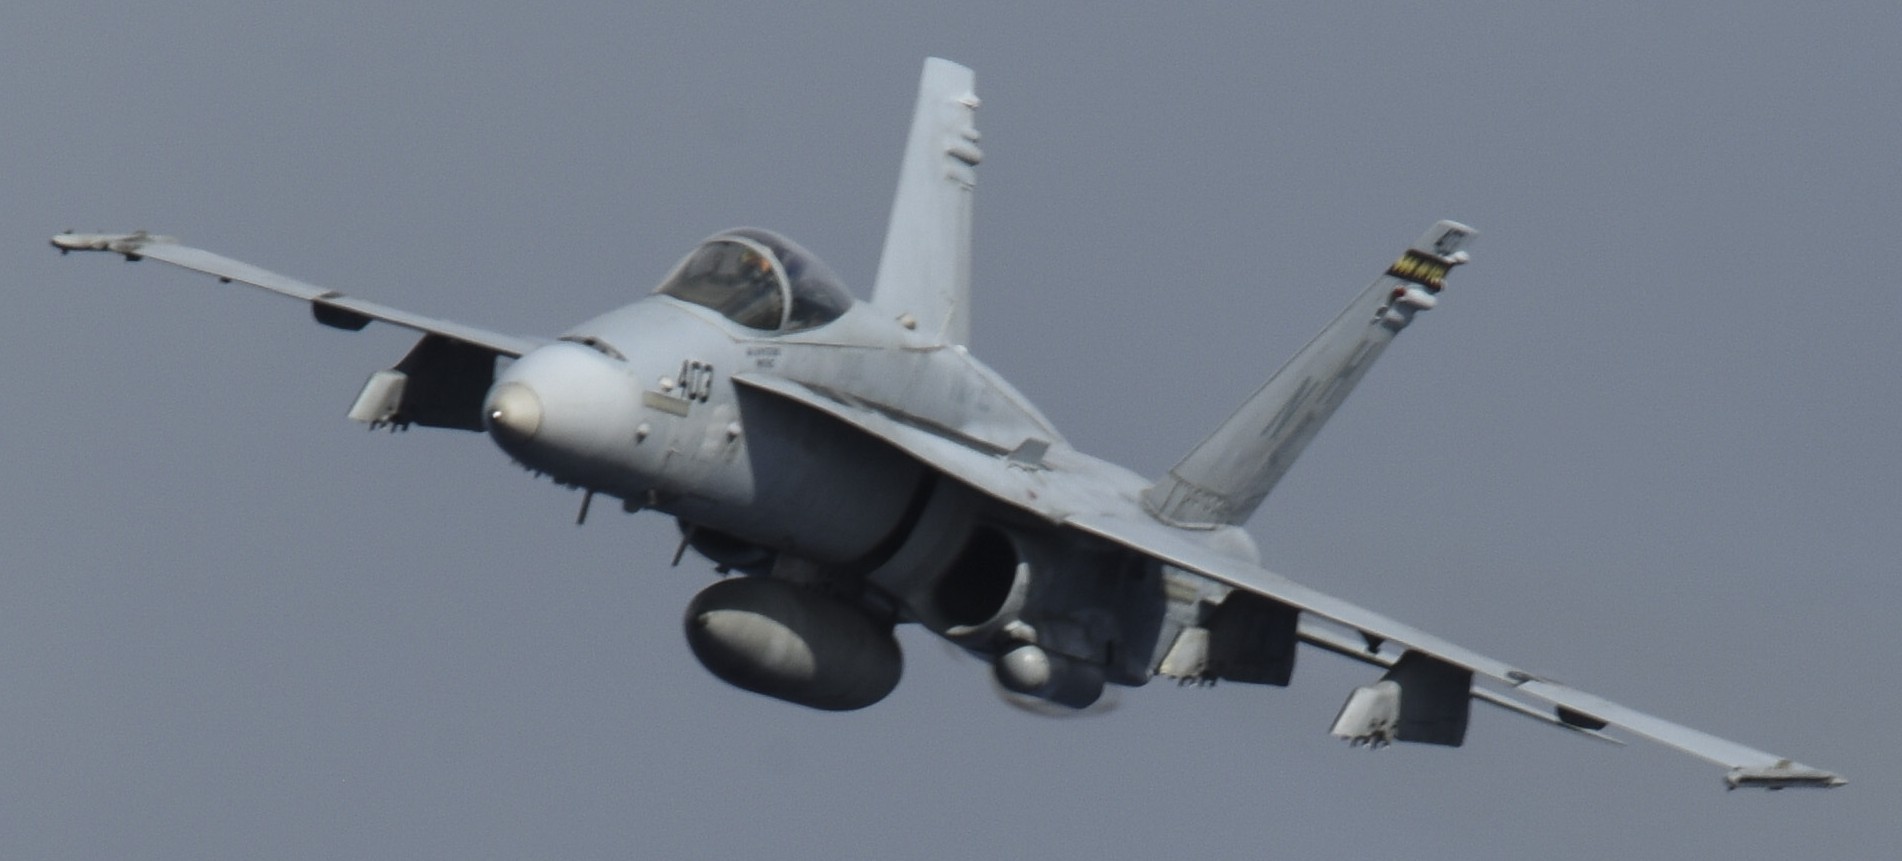 vmfa-323 death rattlers marine fighter attack squadron f/a-18c hornet 12